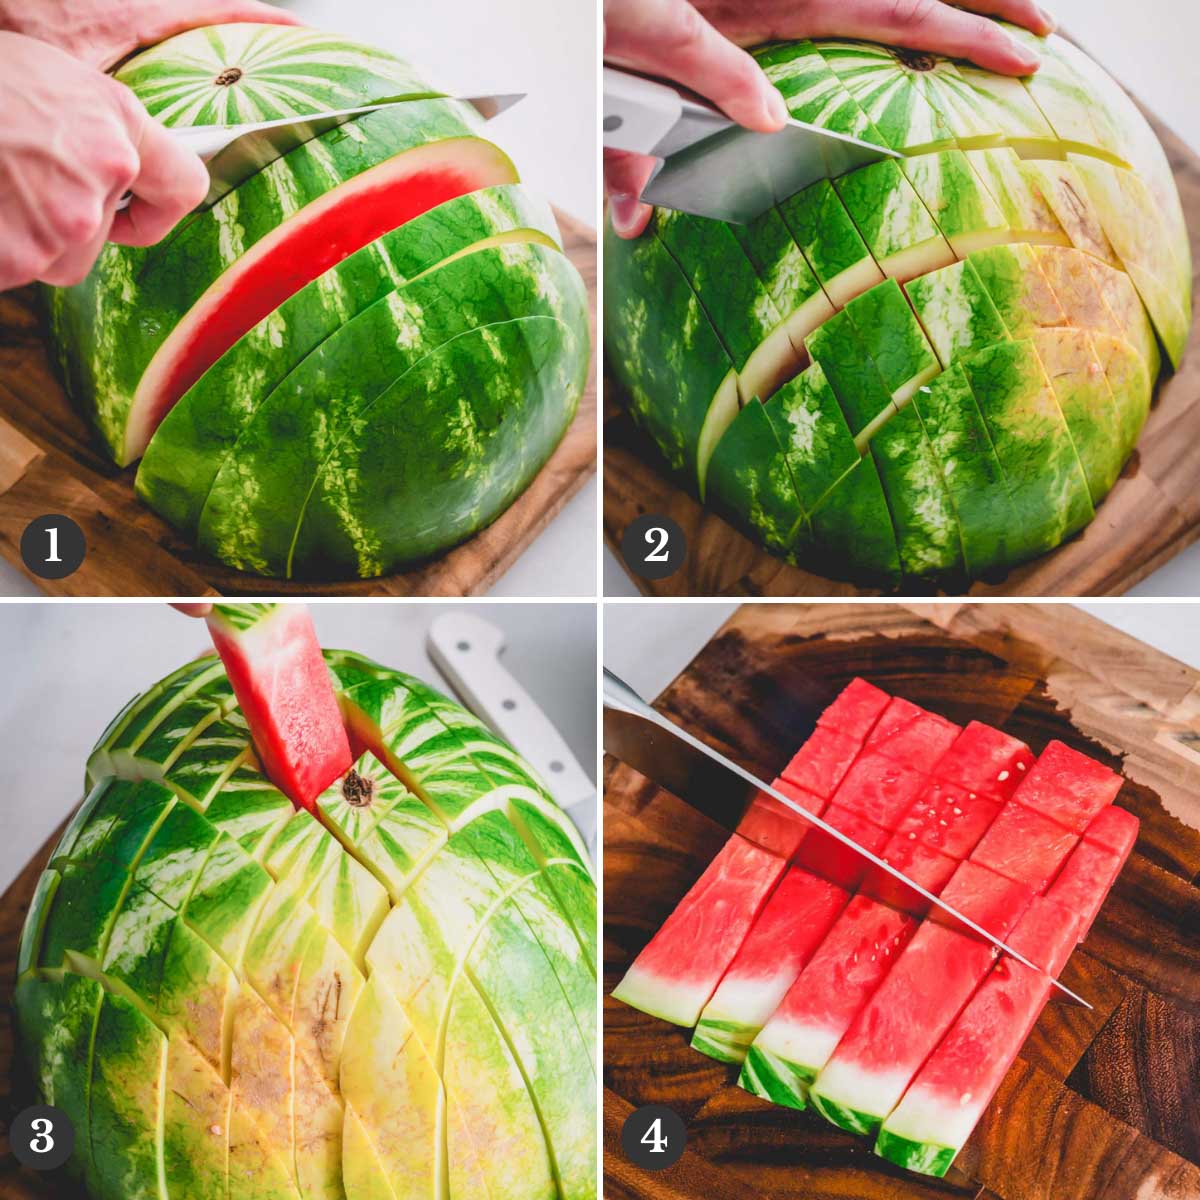 Step by step photos of cutting a watermelon into cubes.